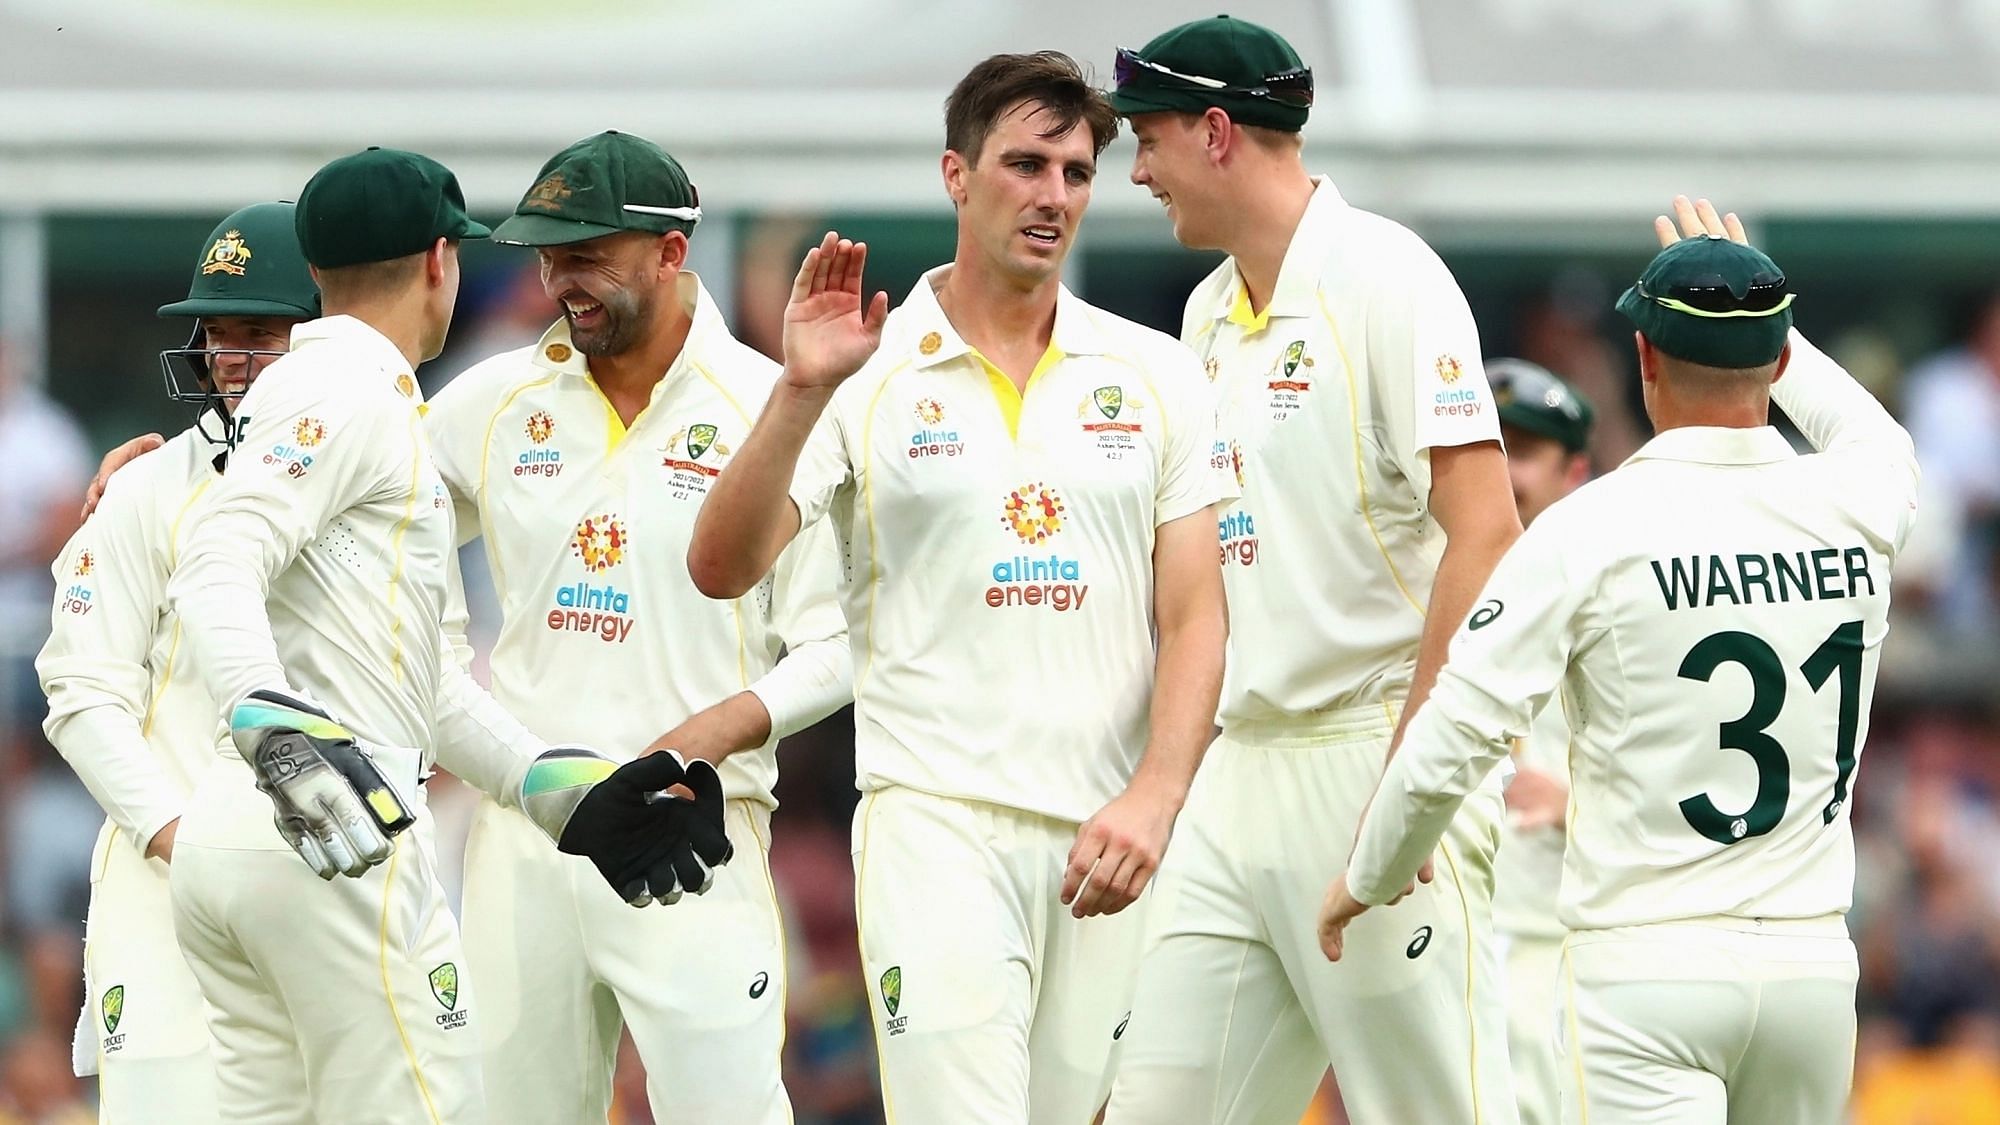 <div class="paragraphs"><p>Aussie Captain and bowler, Pat Cummins made a dream start to his captaincy with a five-wicket haul on day 1 of The Ashes.</p></div>